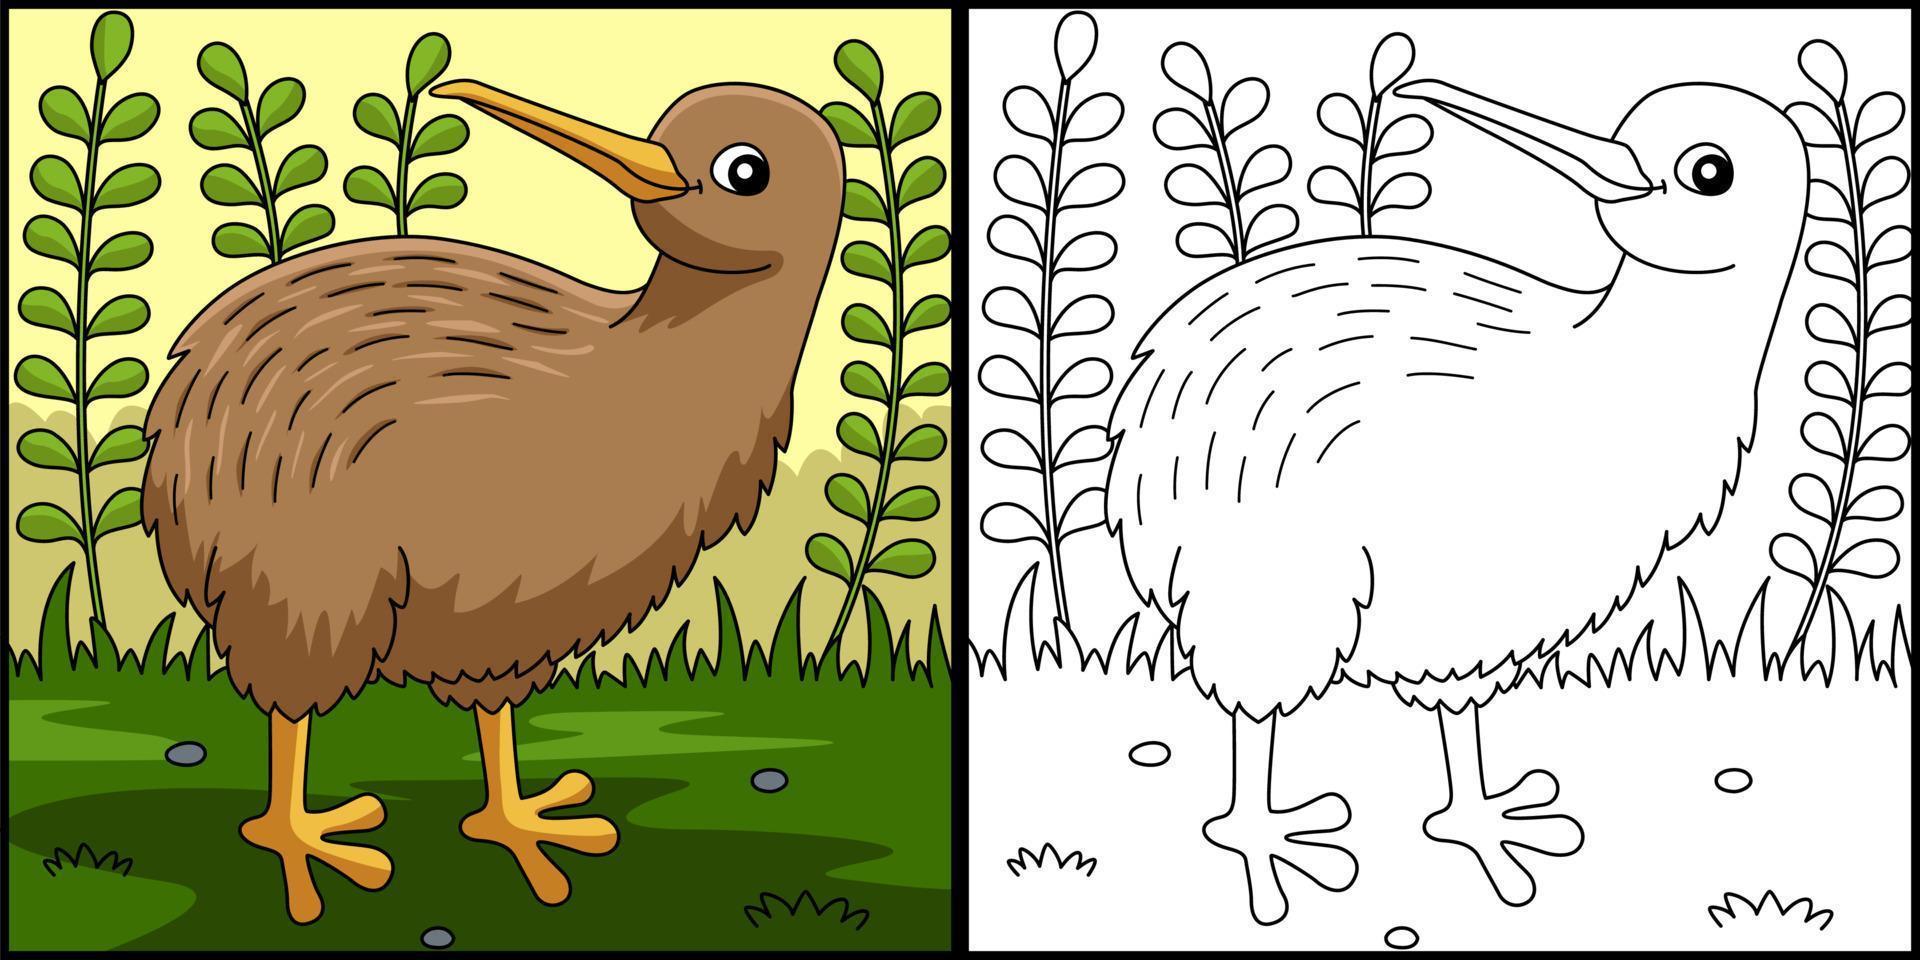 Kiwi Animal Coloring Page Colored Illustration vector